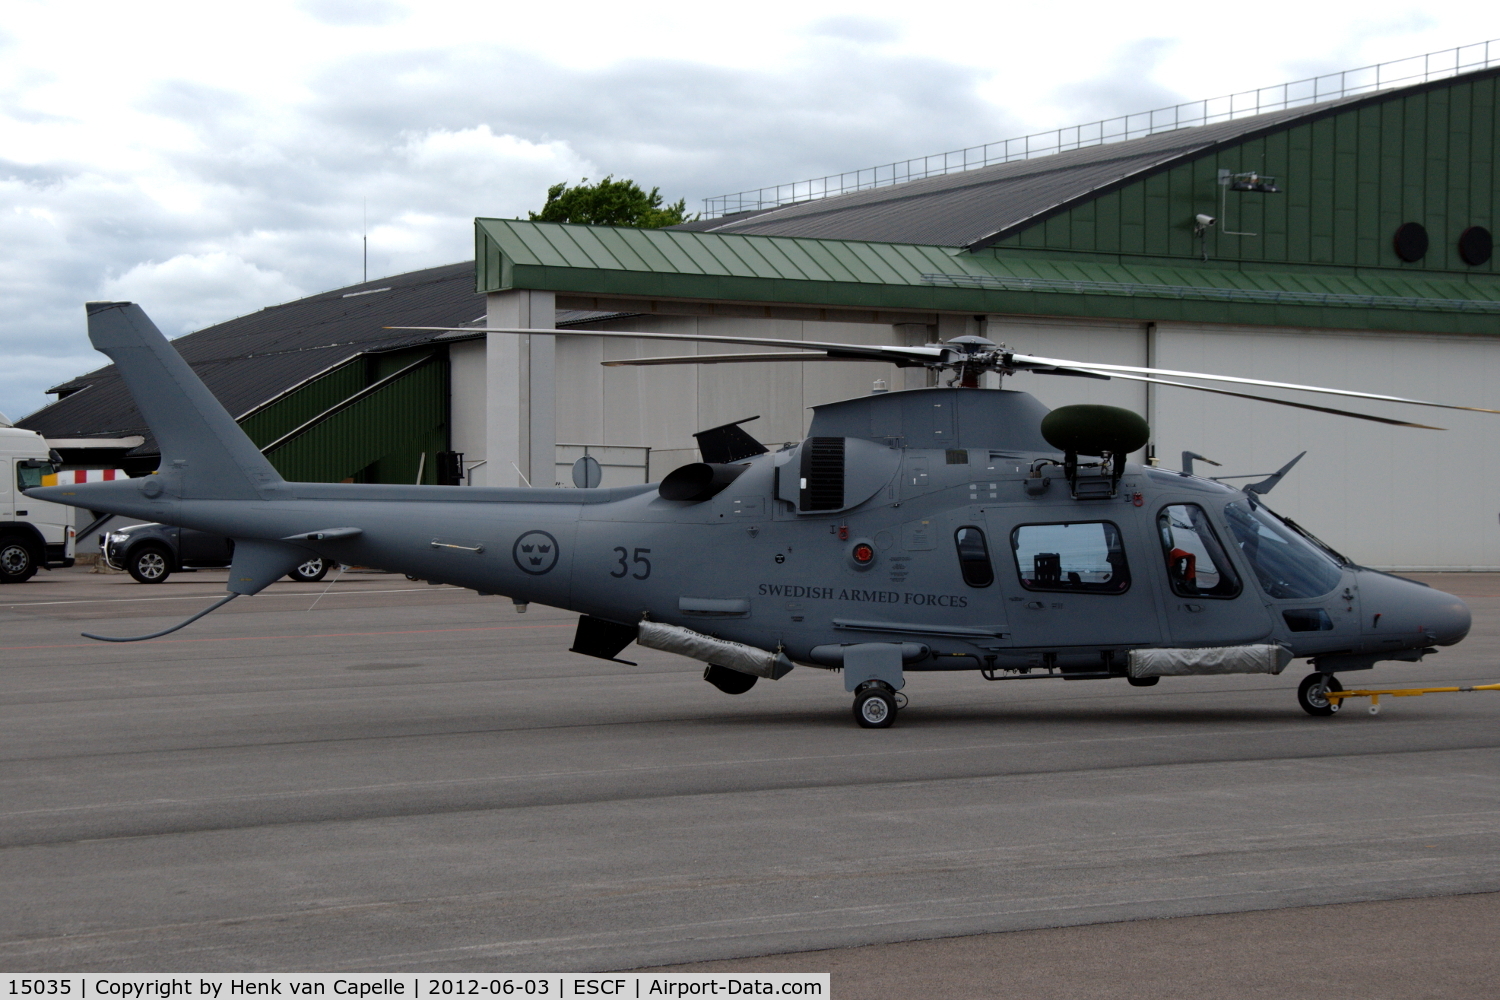 15035, Agusta Hkp15B (A-109E LUH) C/N 13765, Hkp15B helicopter of the Swedish Defense Helicopter Wing at Malmen Air Base, Sweden.